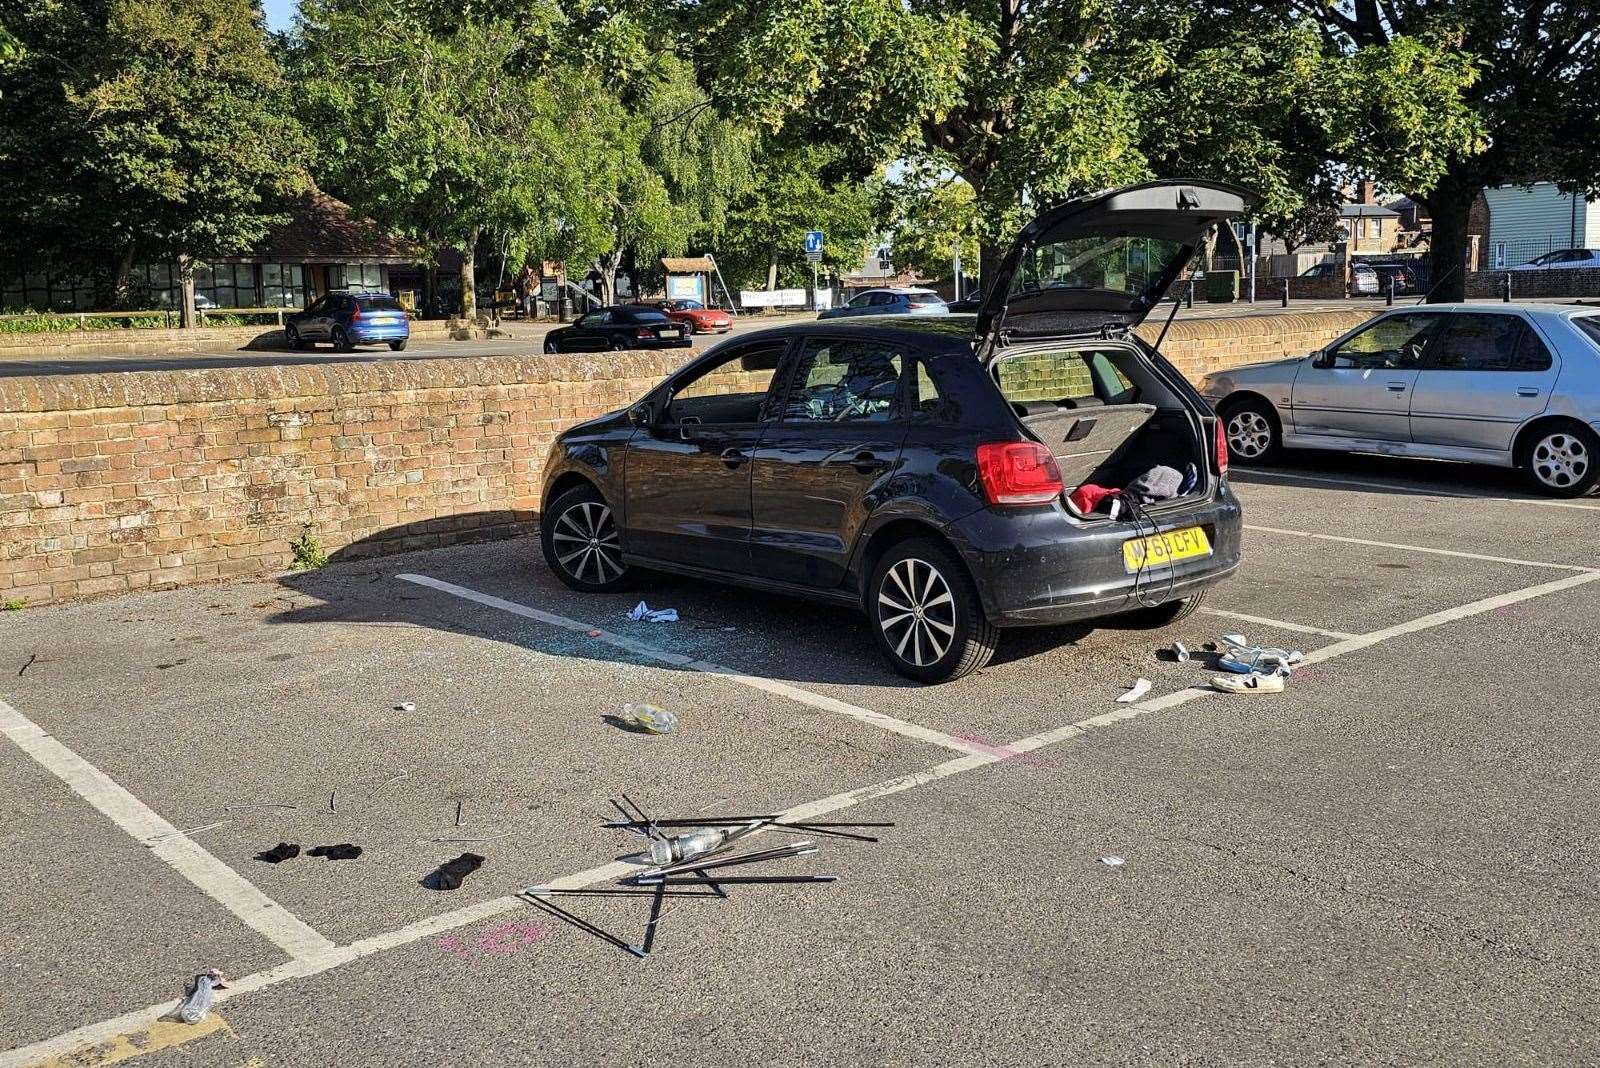 Central car park Faversham was strewn with items torn from this car’s boot